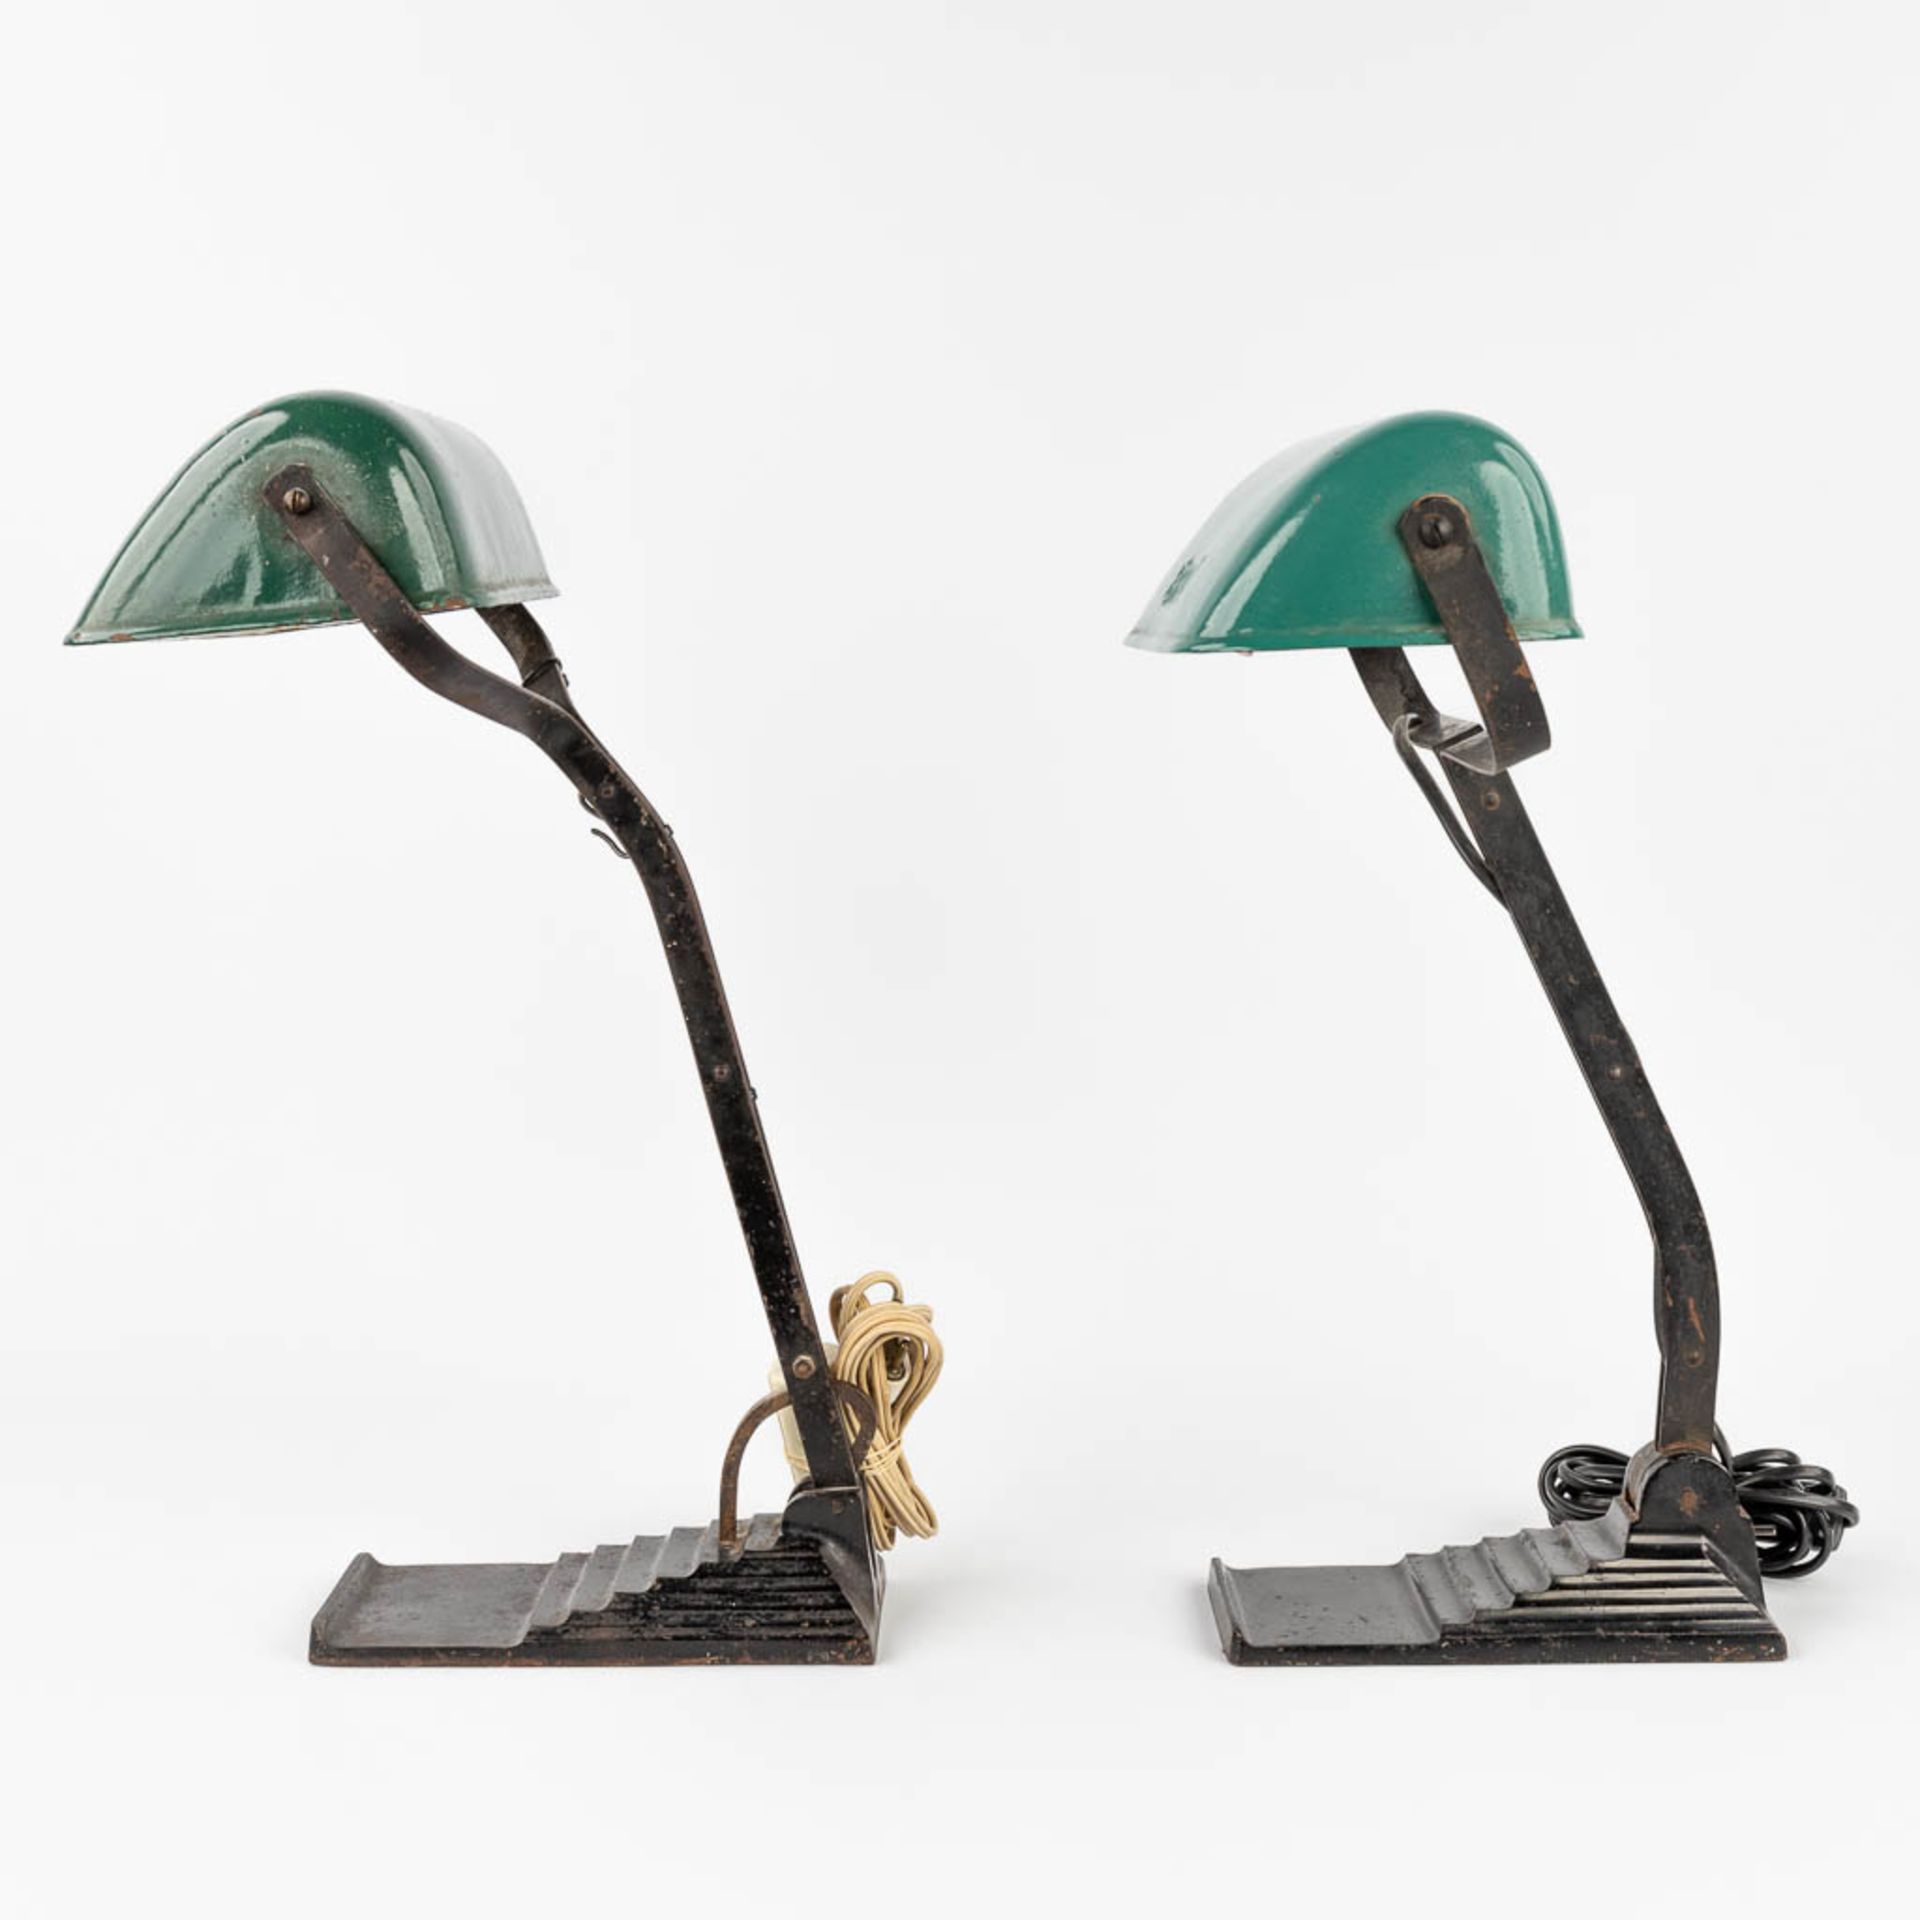 Erpe, a collection of 2 table lamps with green enamelled metal shades. (H:44 cm) - Image 7 of 17